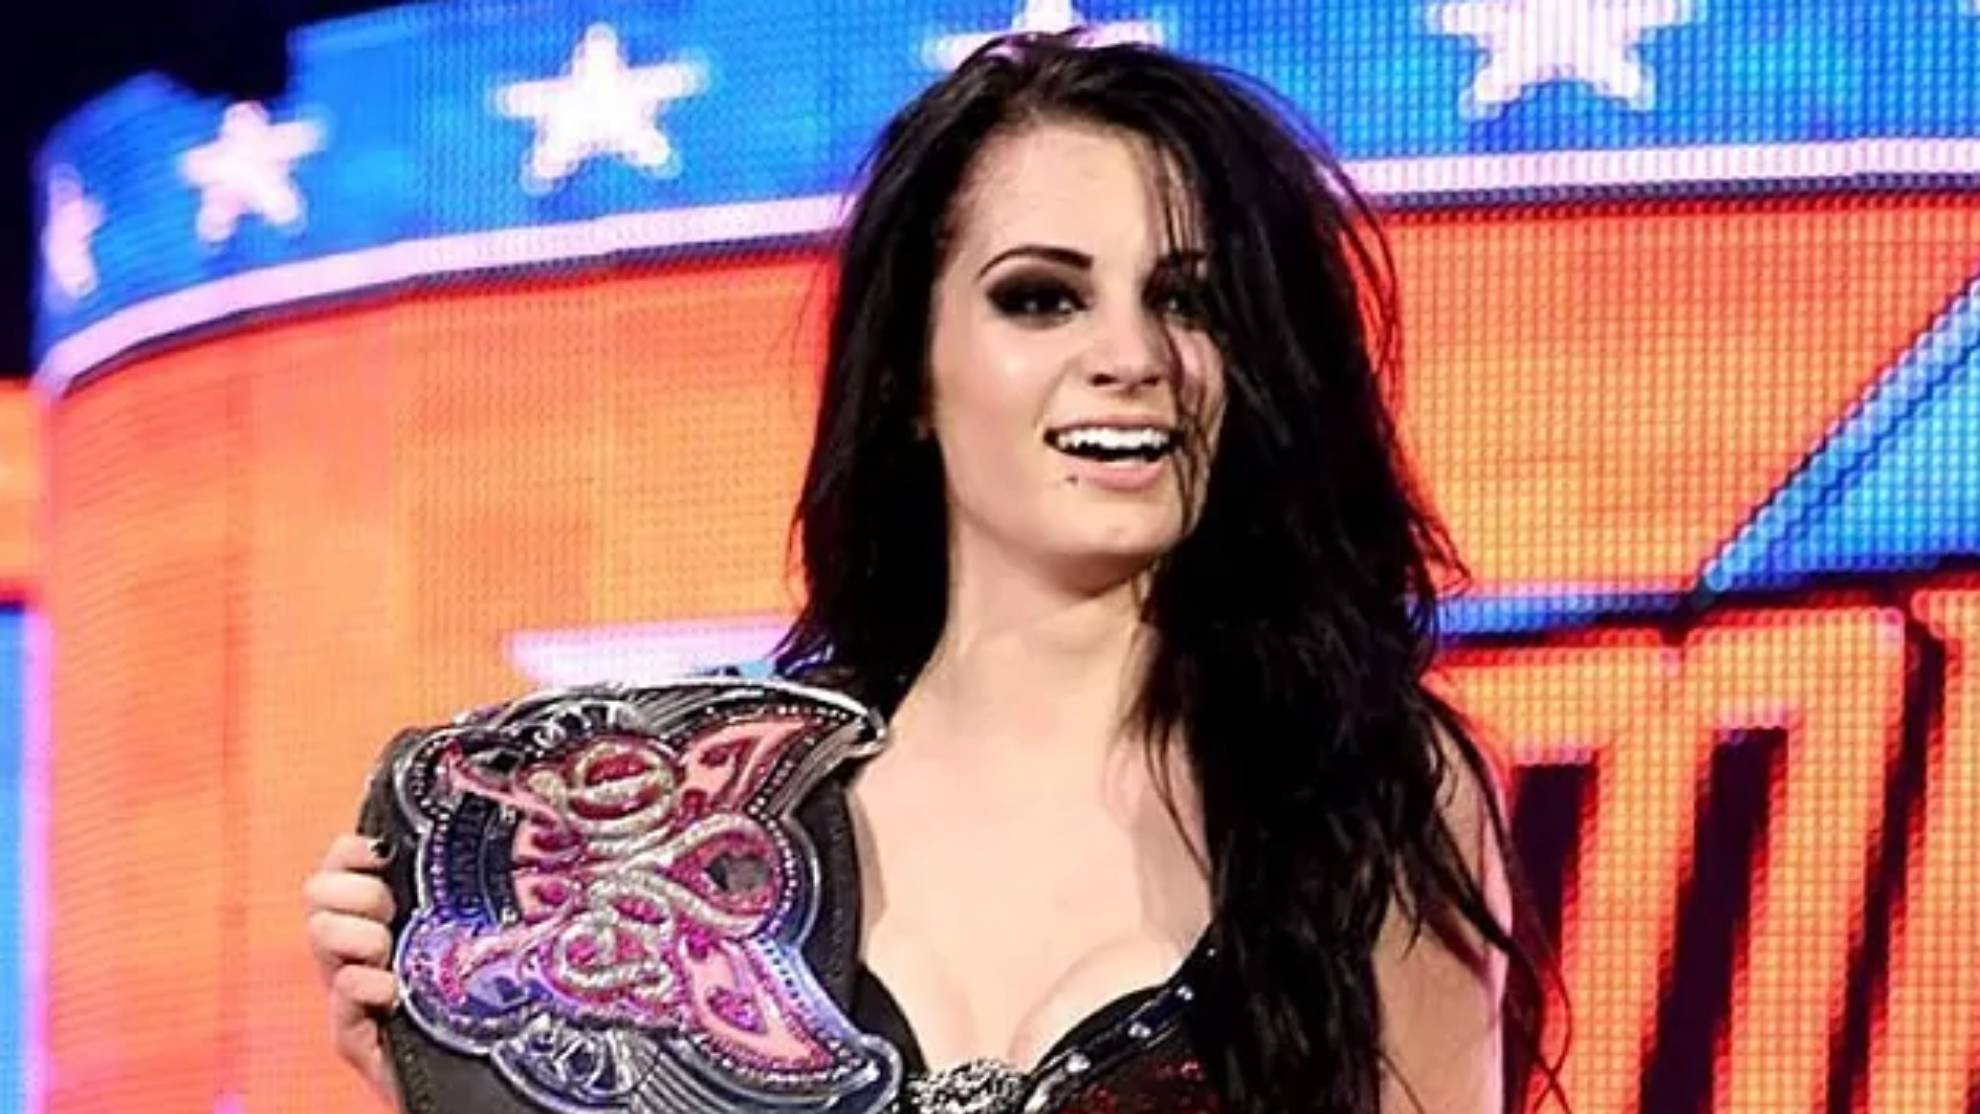 Former WWE star Paige contemplated suicide after leaked sex-tape